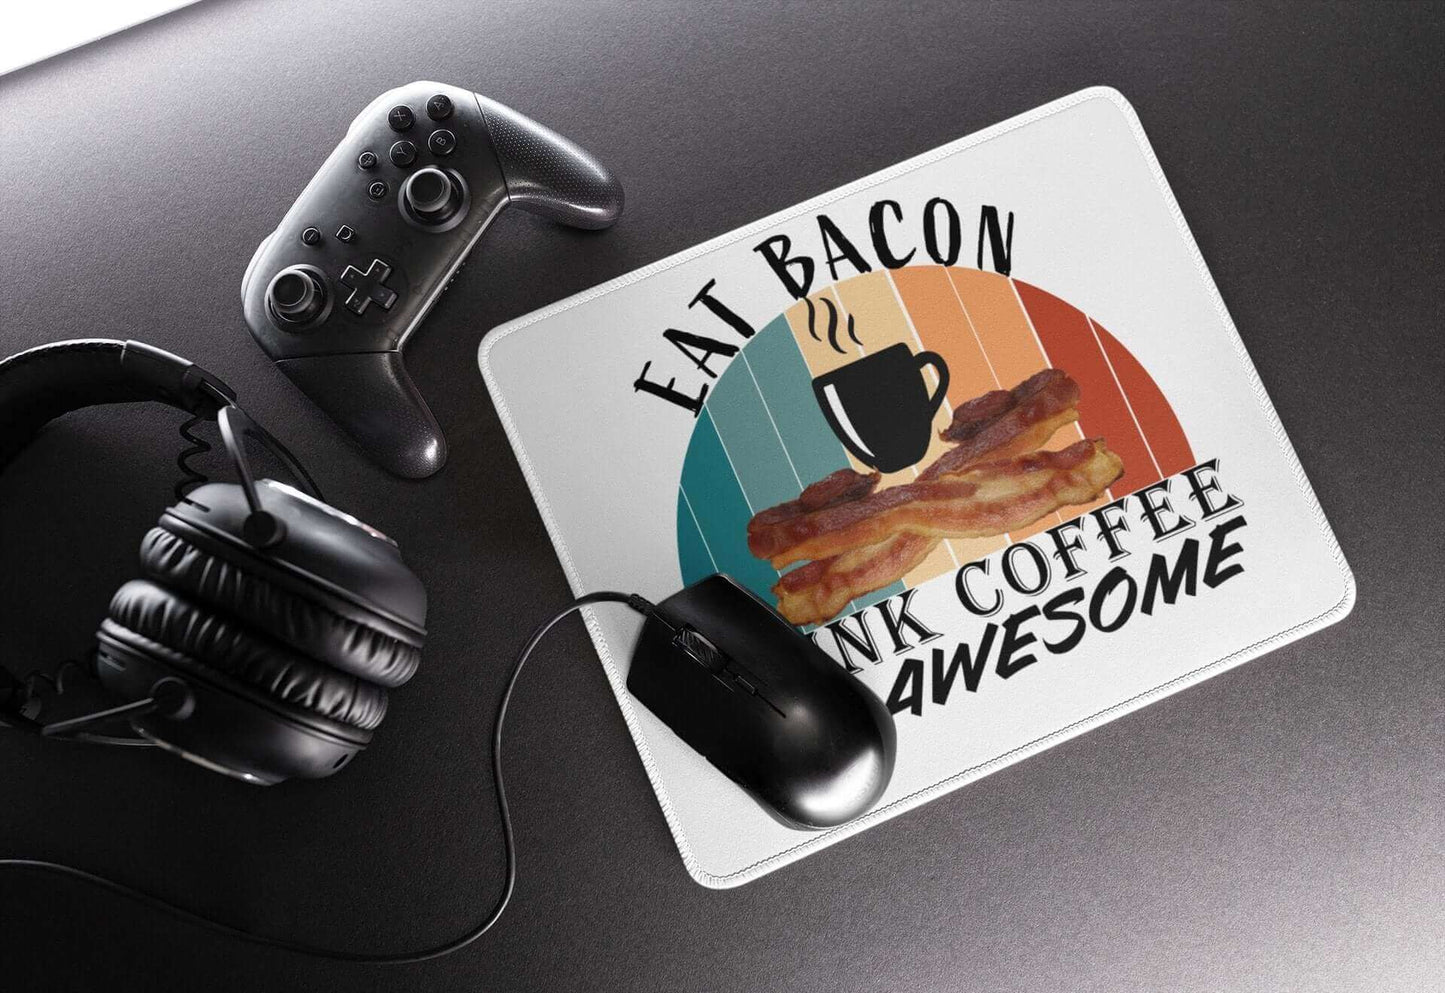 Eat Bacon, Drink Coffee, Be Awesome - Mouse pad - Horrible Designs